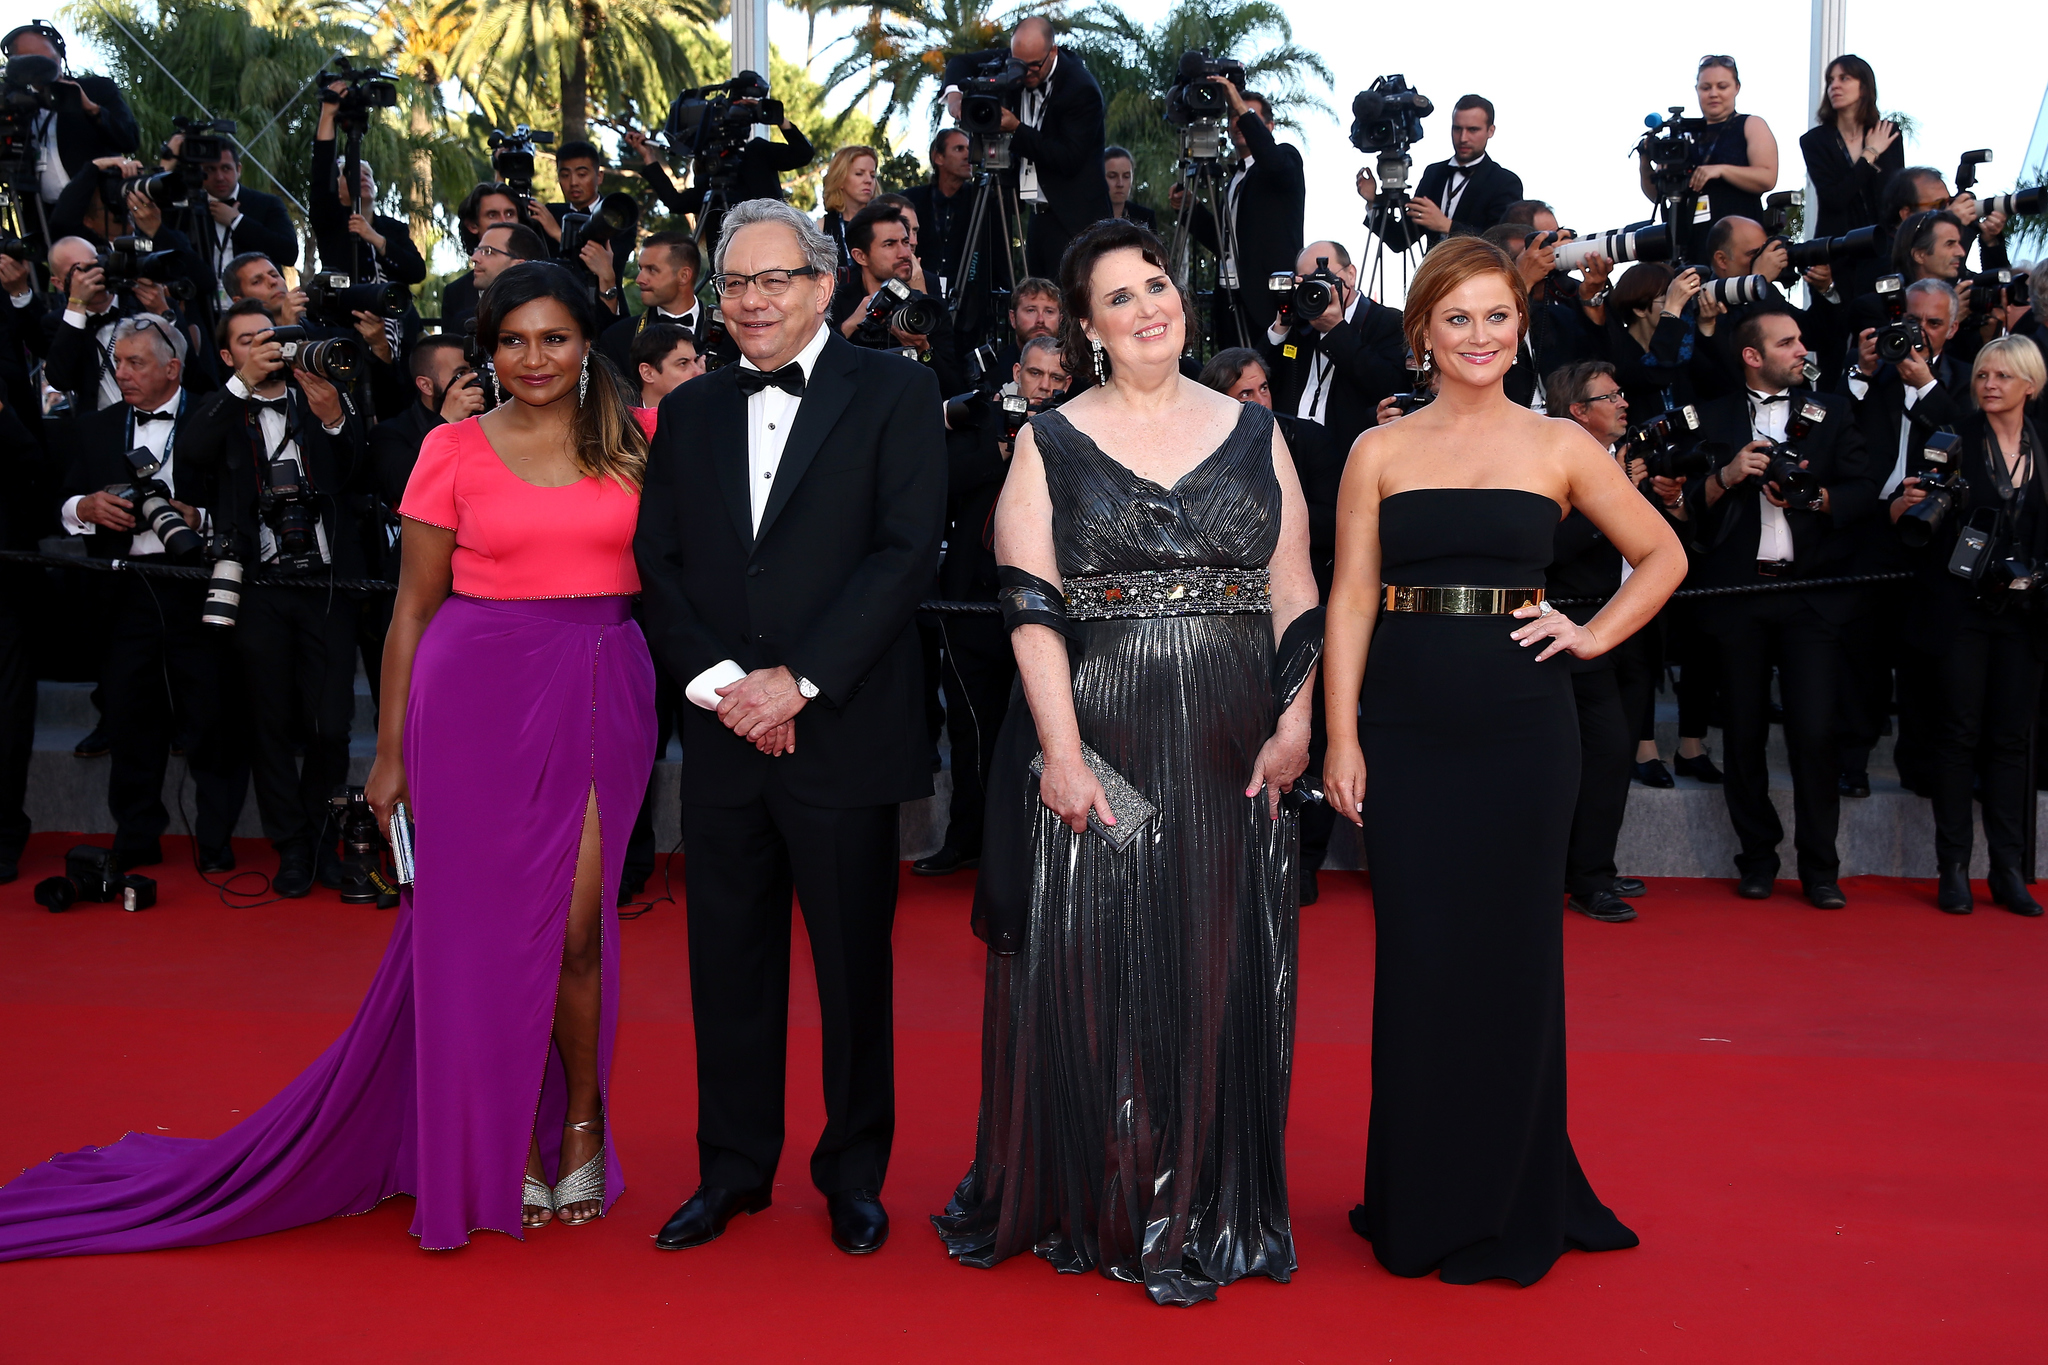 Lewis Black, Amy Poehler, Phyllis Smith, Mindy Kaling and Andreas Rentz at event of Isvirkscias pasaulis (2015)